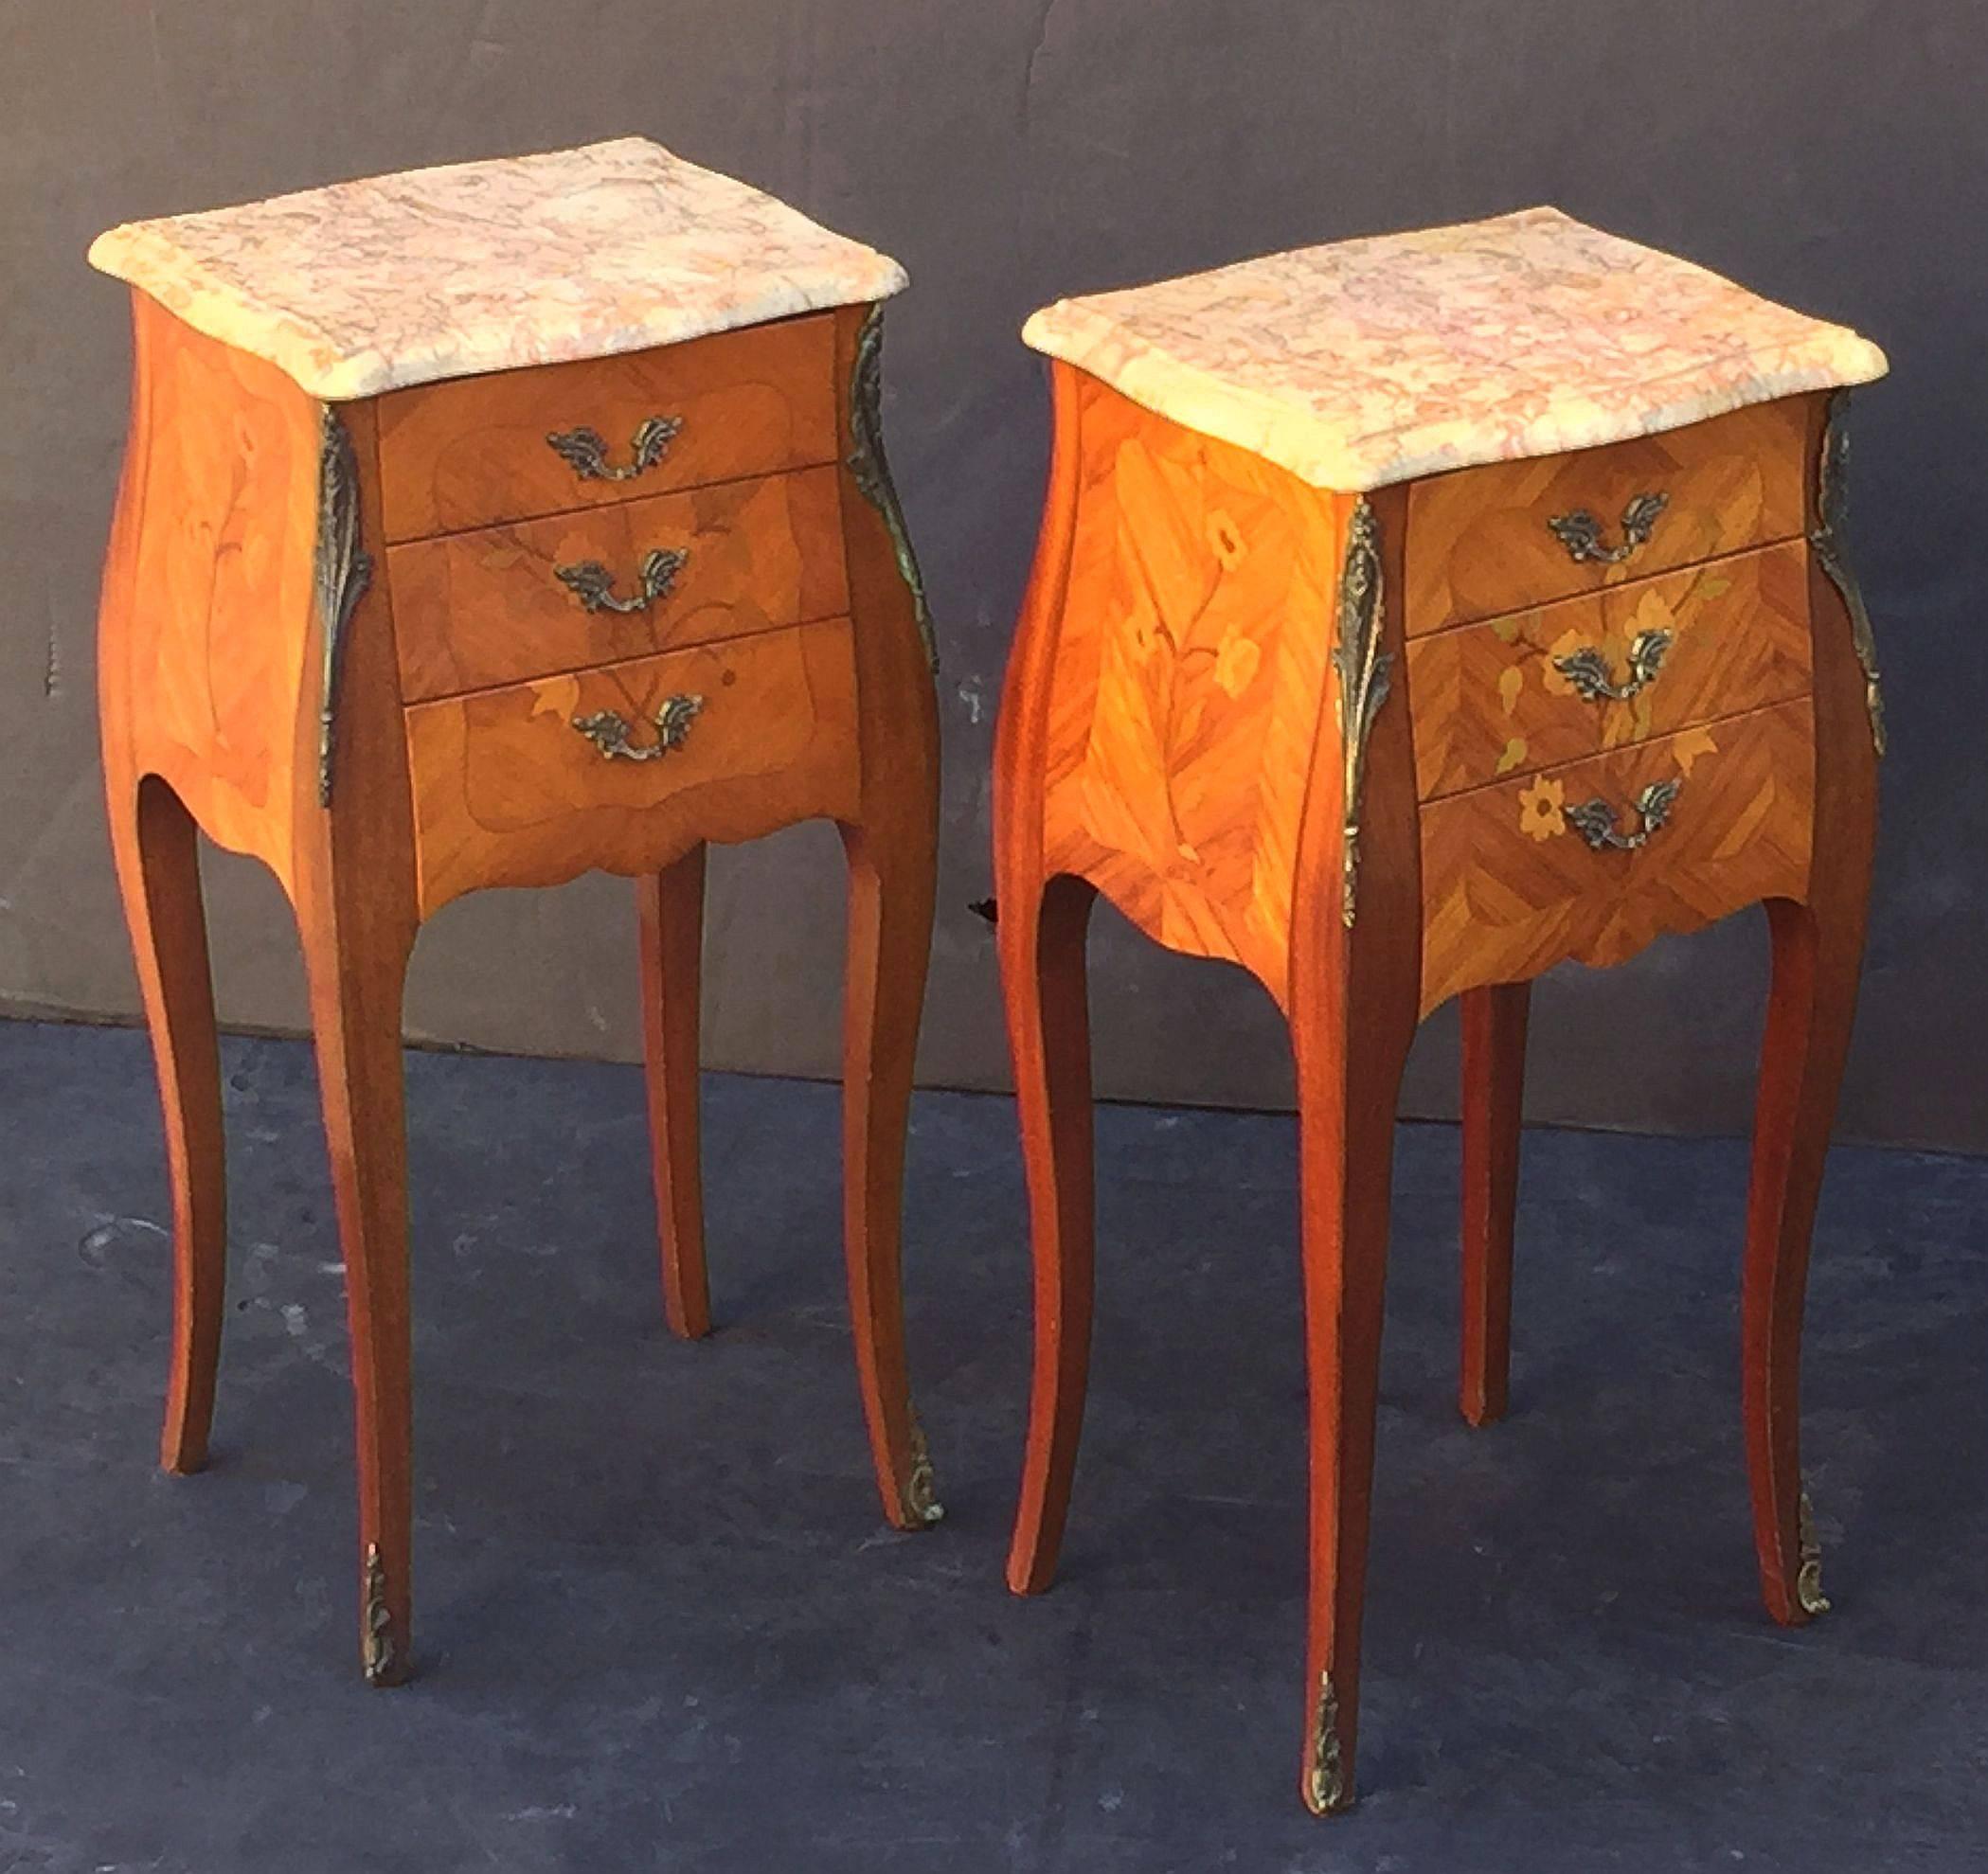 A fine pair of French bedside end tables or night stands, each stand featuring a figured marble-top with serpentine edge over a frieze with three inlaid drawers with decorative brass pulls, marquetry sides, ormolu accents, and apron bottoms.
Both